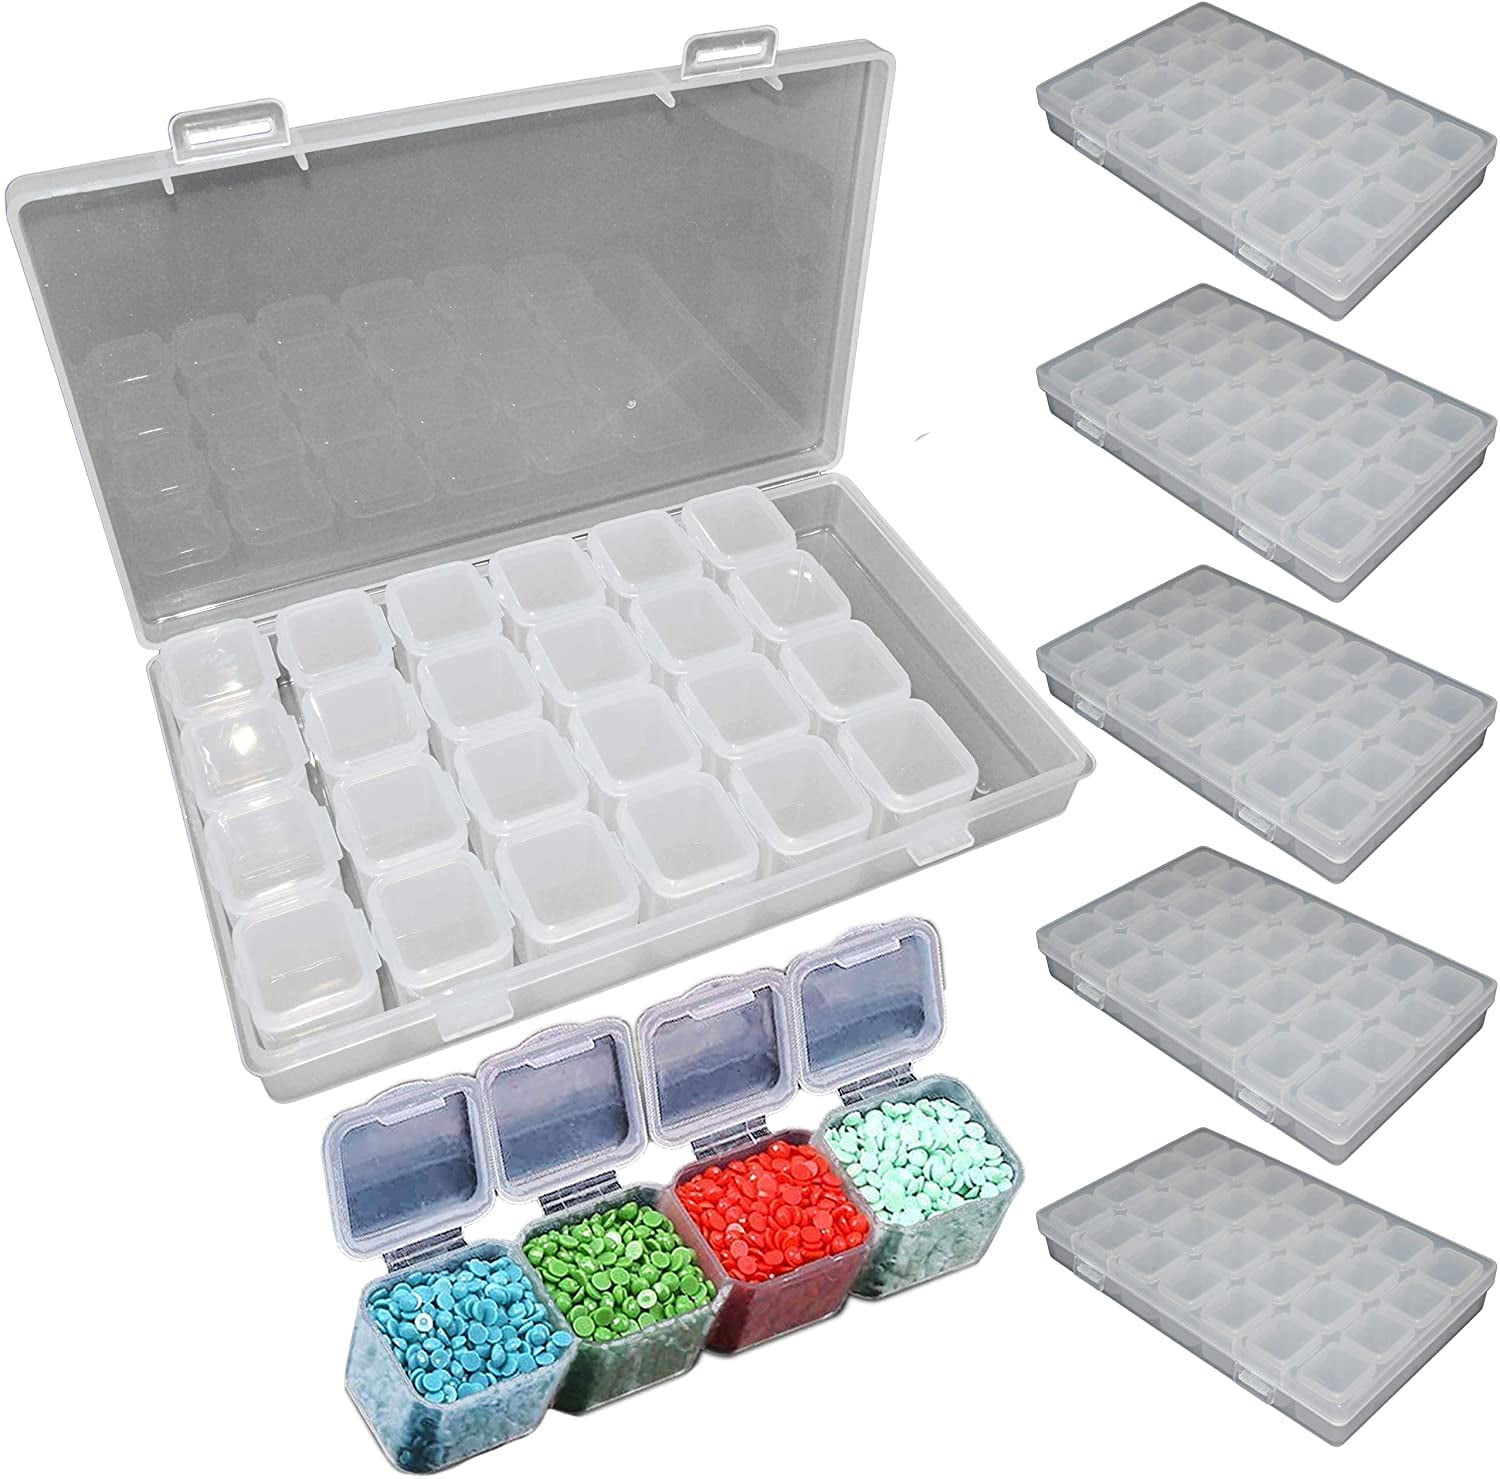 Diamond Painting Affordable Storage Containers 28/56 Grids Affordable Storage  Case Box Nails Glitter Rhinestone Crystal Beads Accessories Container From  Goodhopes, $1.02